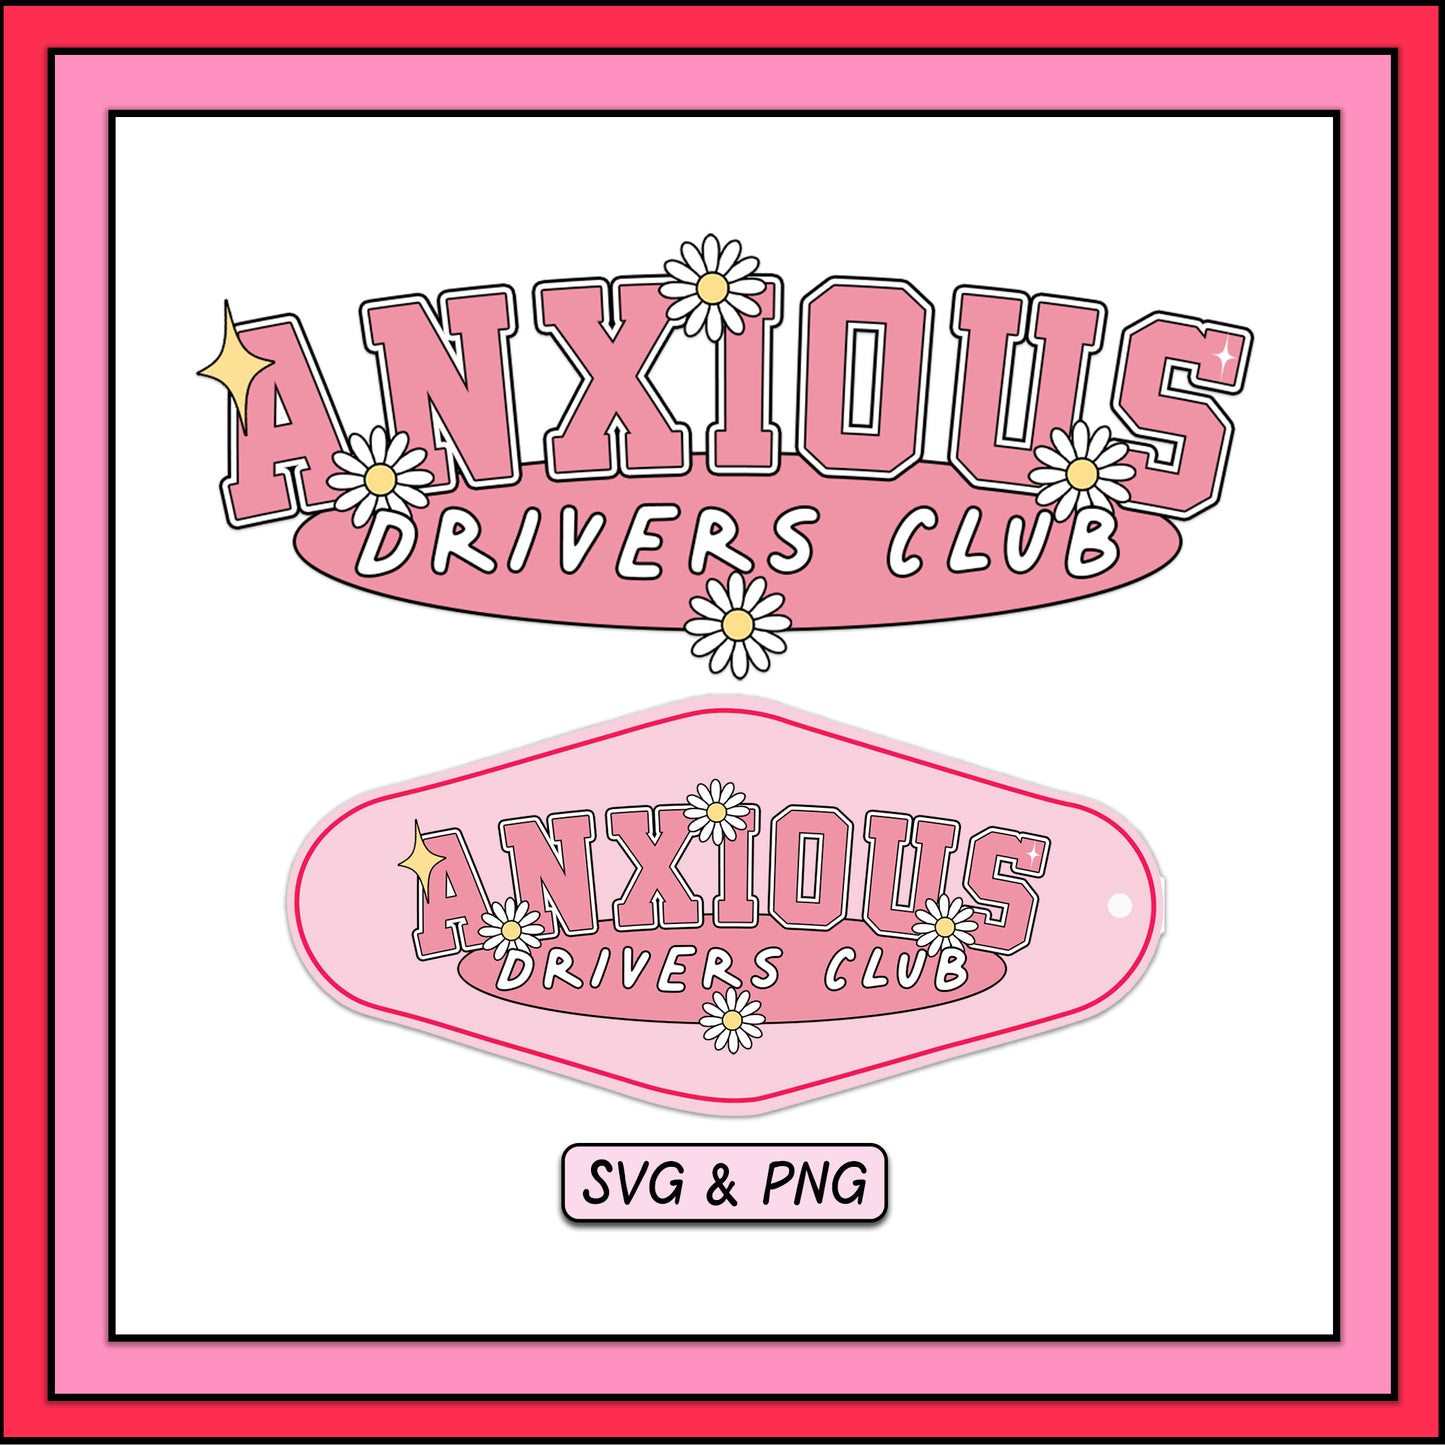 Anxious Drivers Club - SVG & PNG Design File